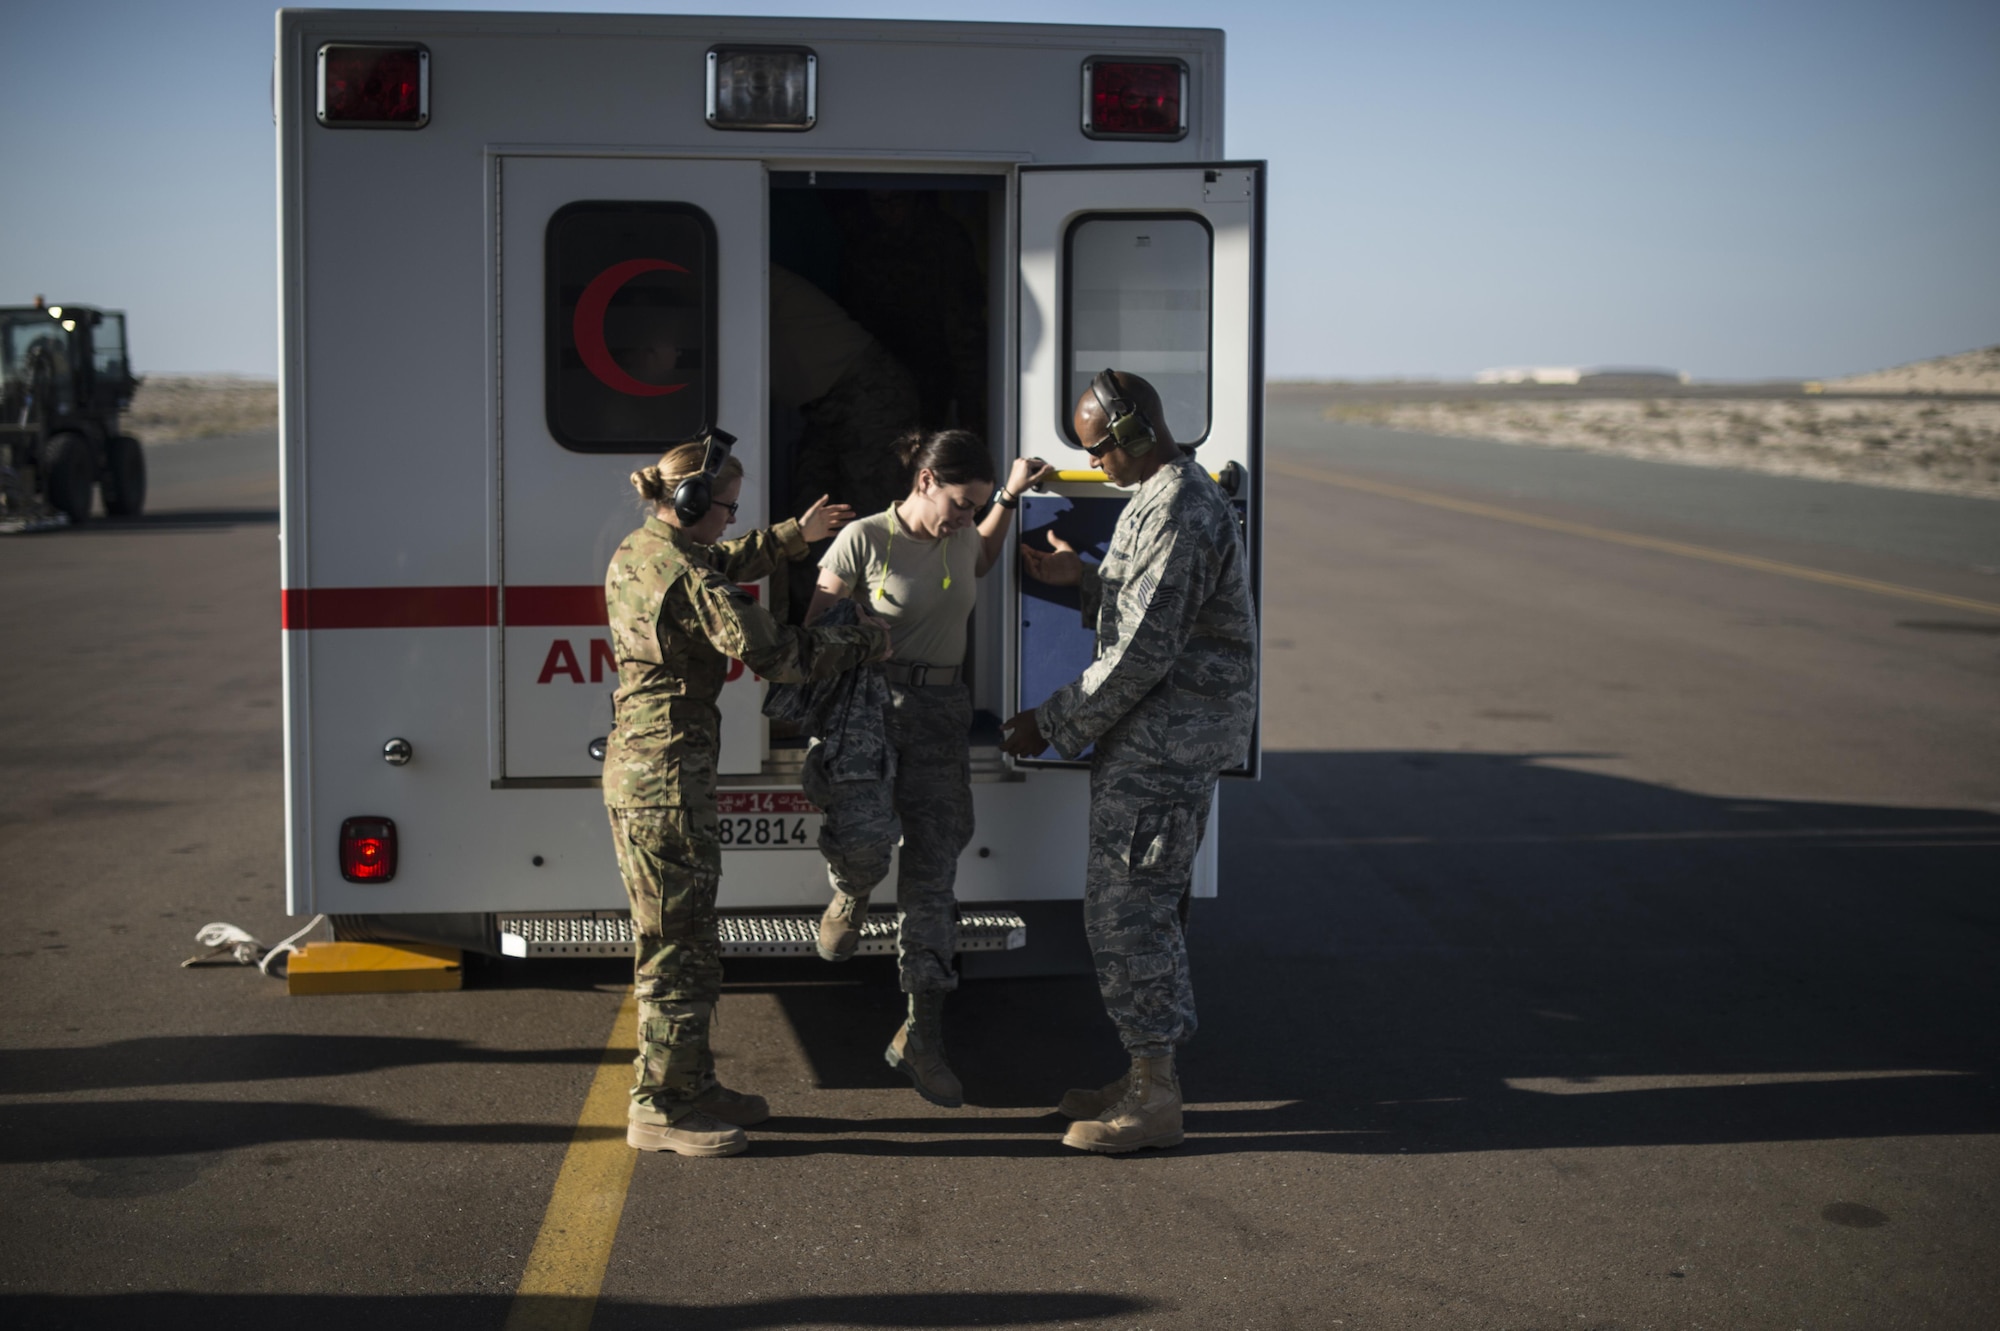 Members of the 379th Expeditionary Aeromedical Evacuation Squadron help a patient off an ambulance at an undisclosed location in Southwest Asia, Feb. 11, 2016. A typical 379th EAES mission includes transporting patients to locations with more definitive medical care or returning recovered personnel to duty at their deployed locations. (U.S. Air Force photo by Staff Sgt. Corey Hook/Released)